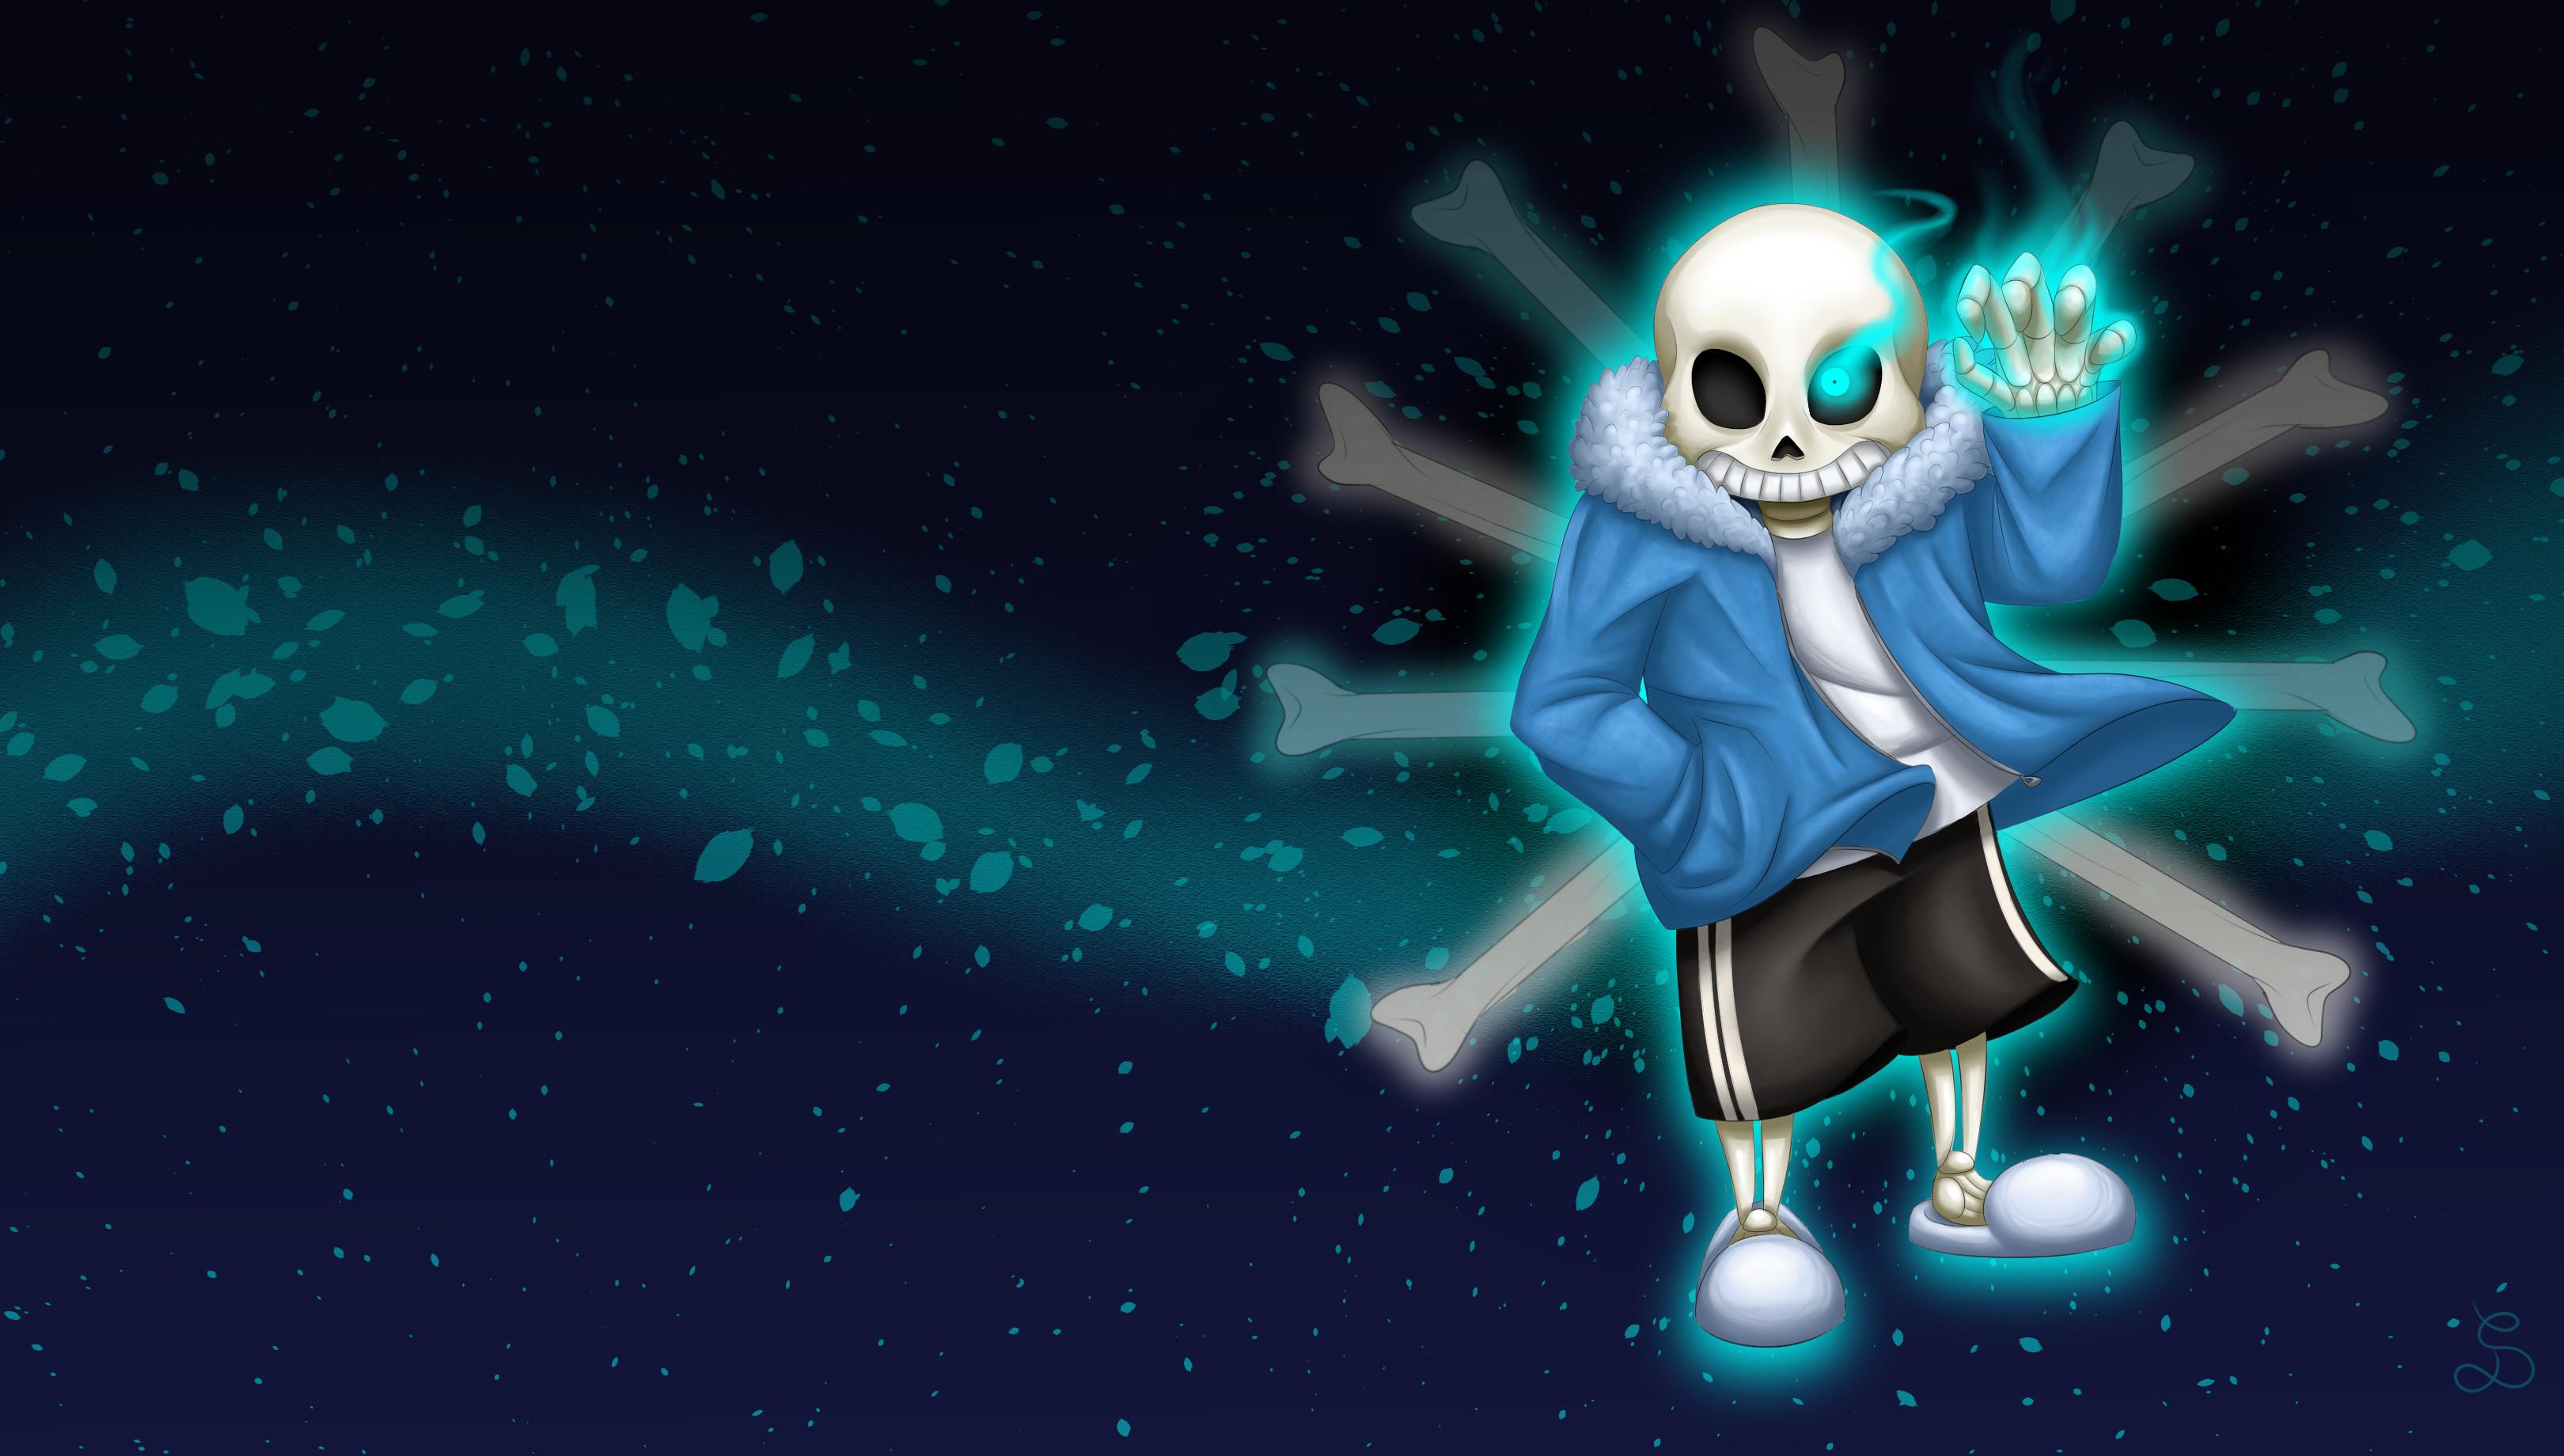 Epic sans wallpaper by Graciano107 - Download on ZEDGE™